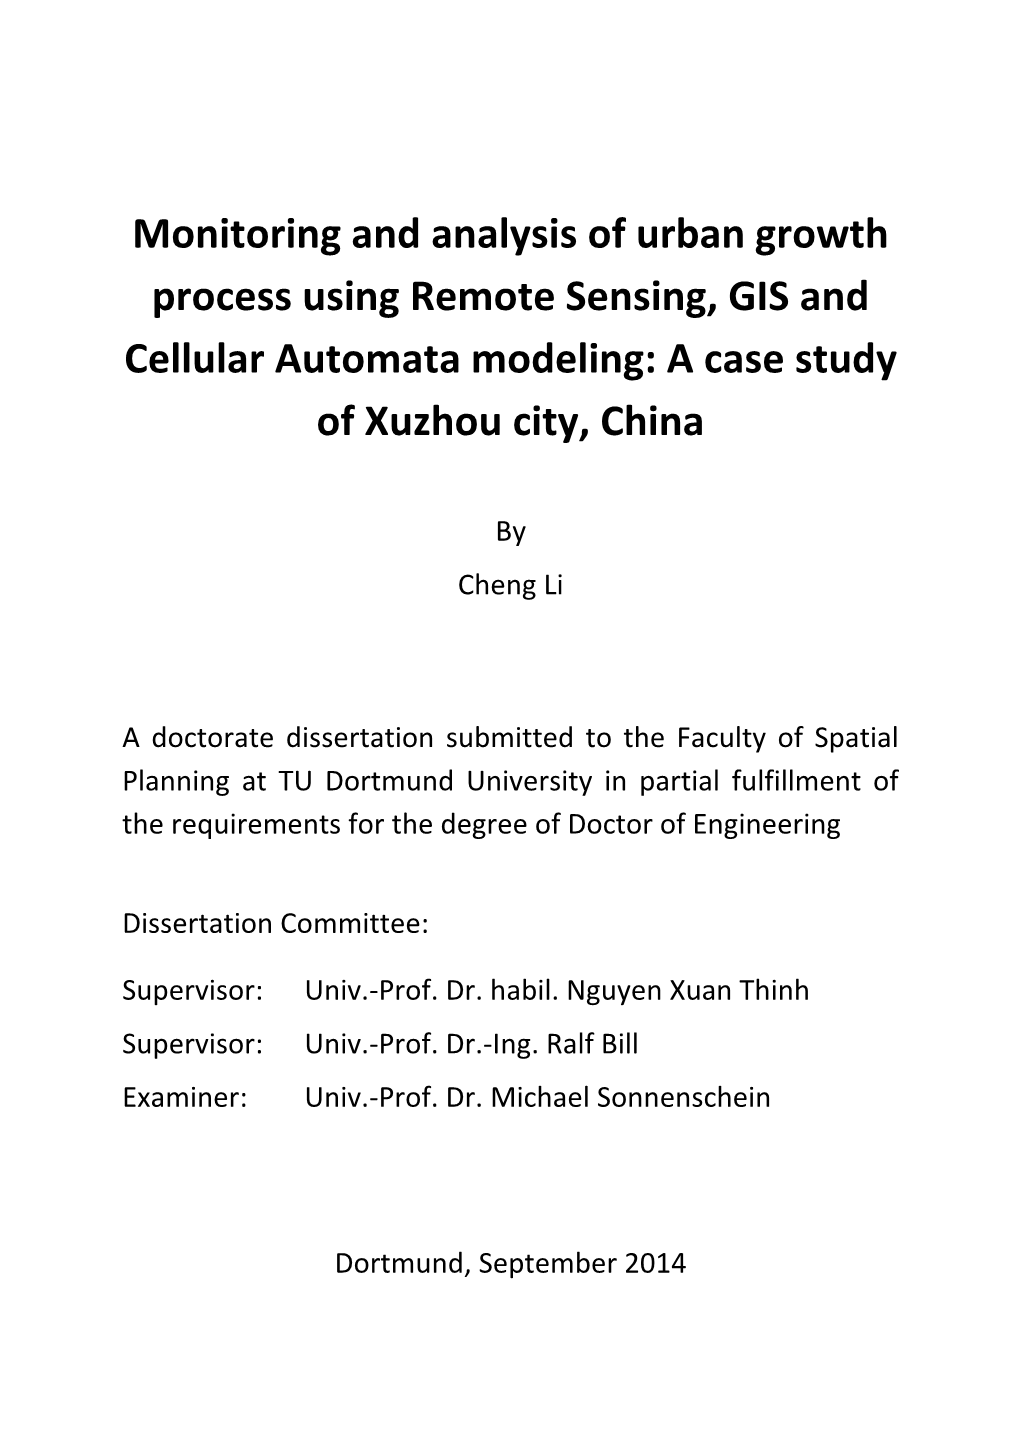 Monitoring and Analysis of Urban Growth Process Using Remote Sensing, GIS and Cellular Automata Modeling: a Case Study of Xuzhou City, China